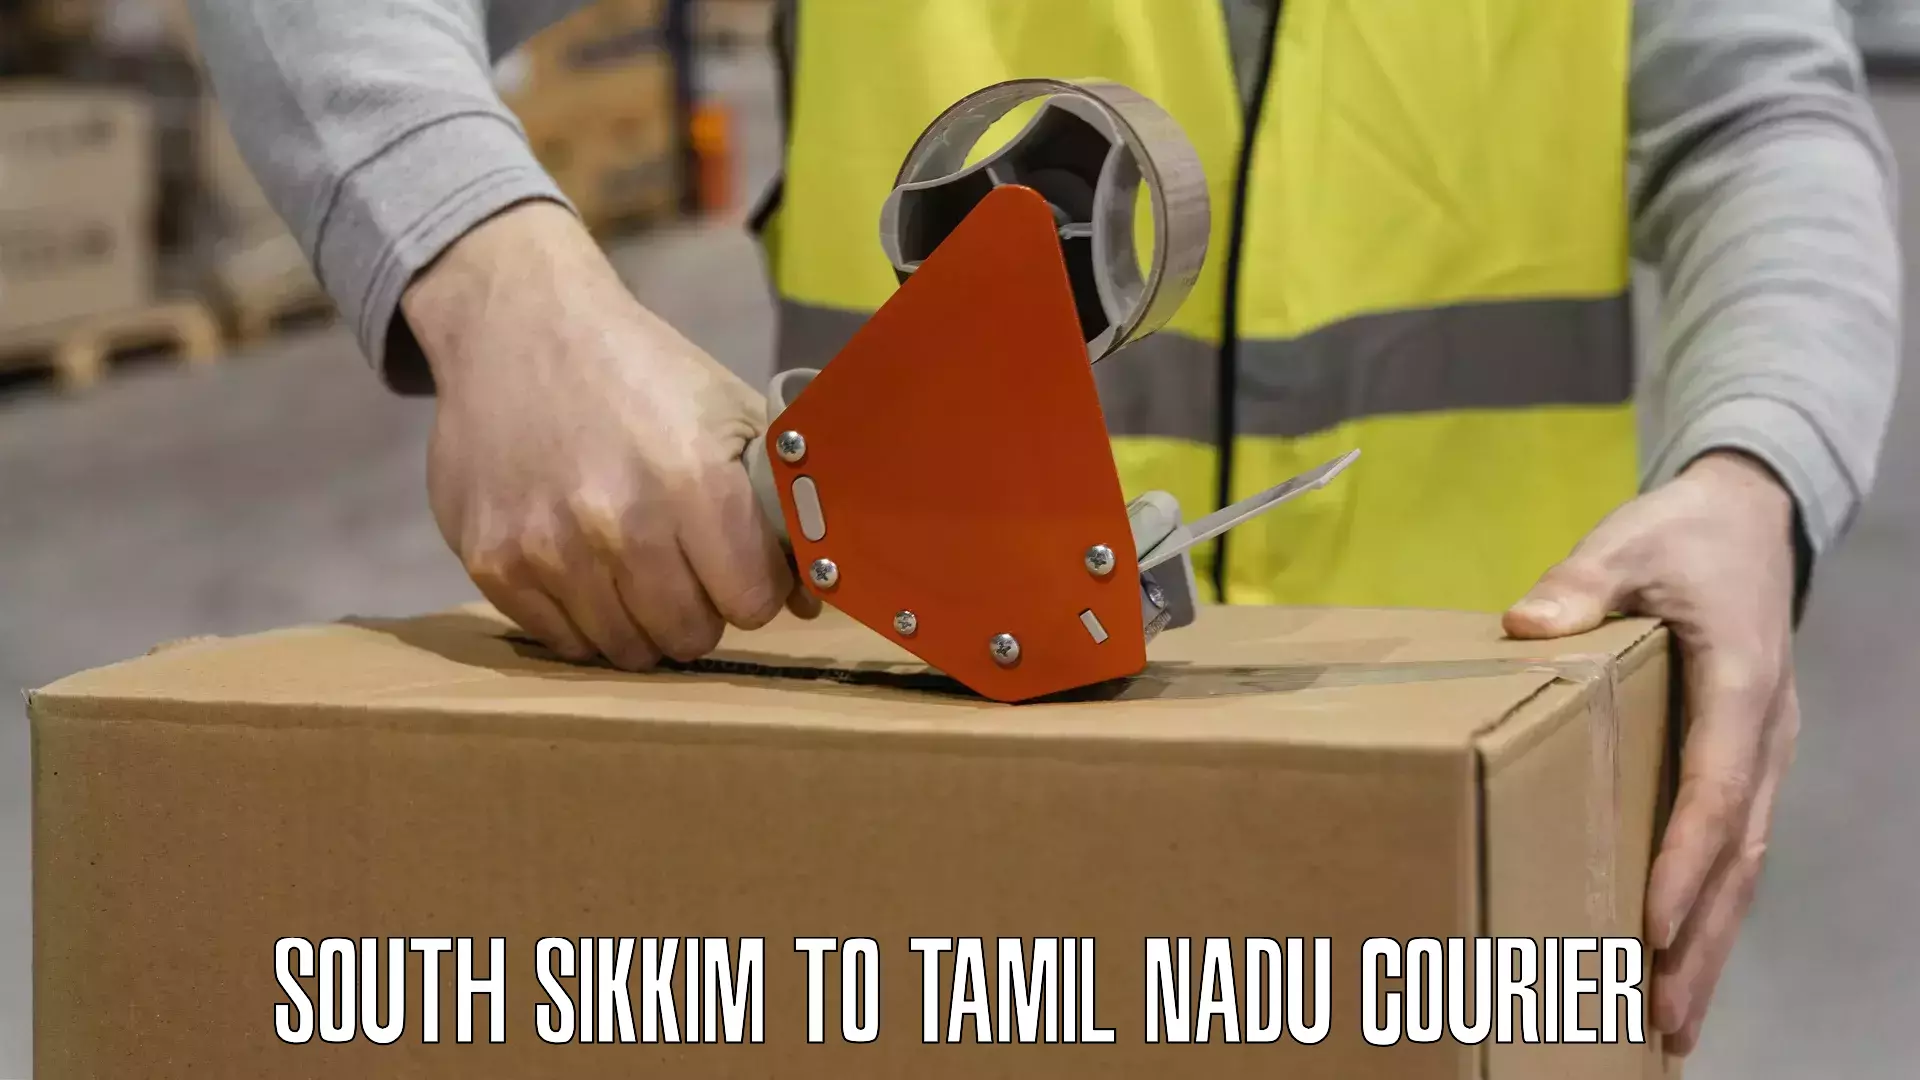 Express logistics providers in South Sikkim to Tamil Nadu